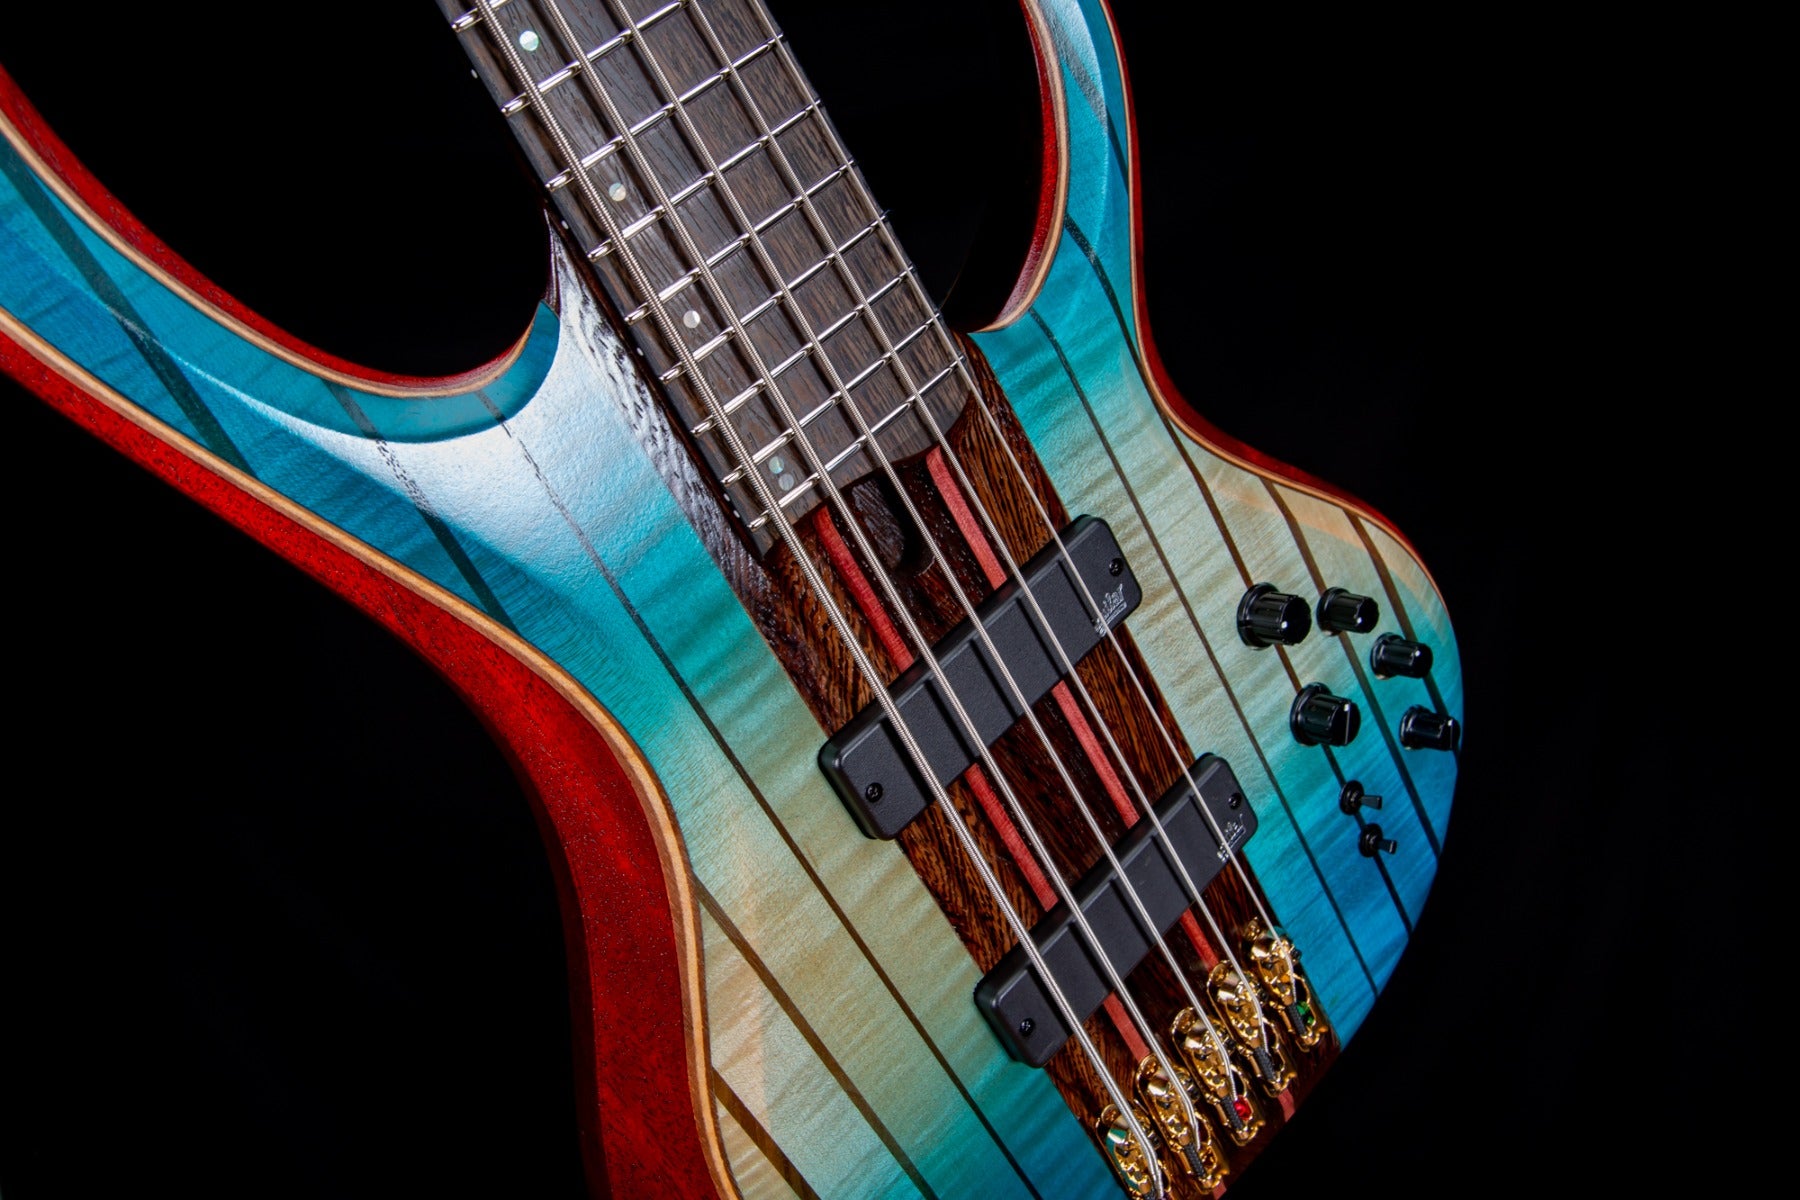 Ibanez Premium BTB1935 5-String Electric Bass - Caribbean Islet Low Gloss view 5